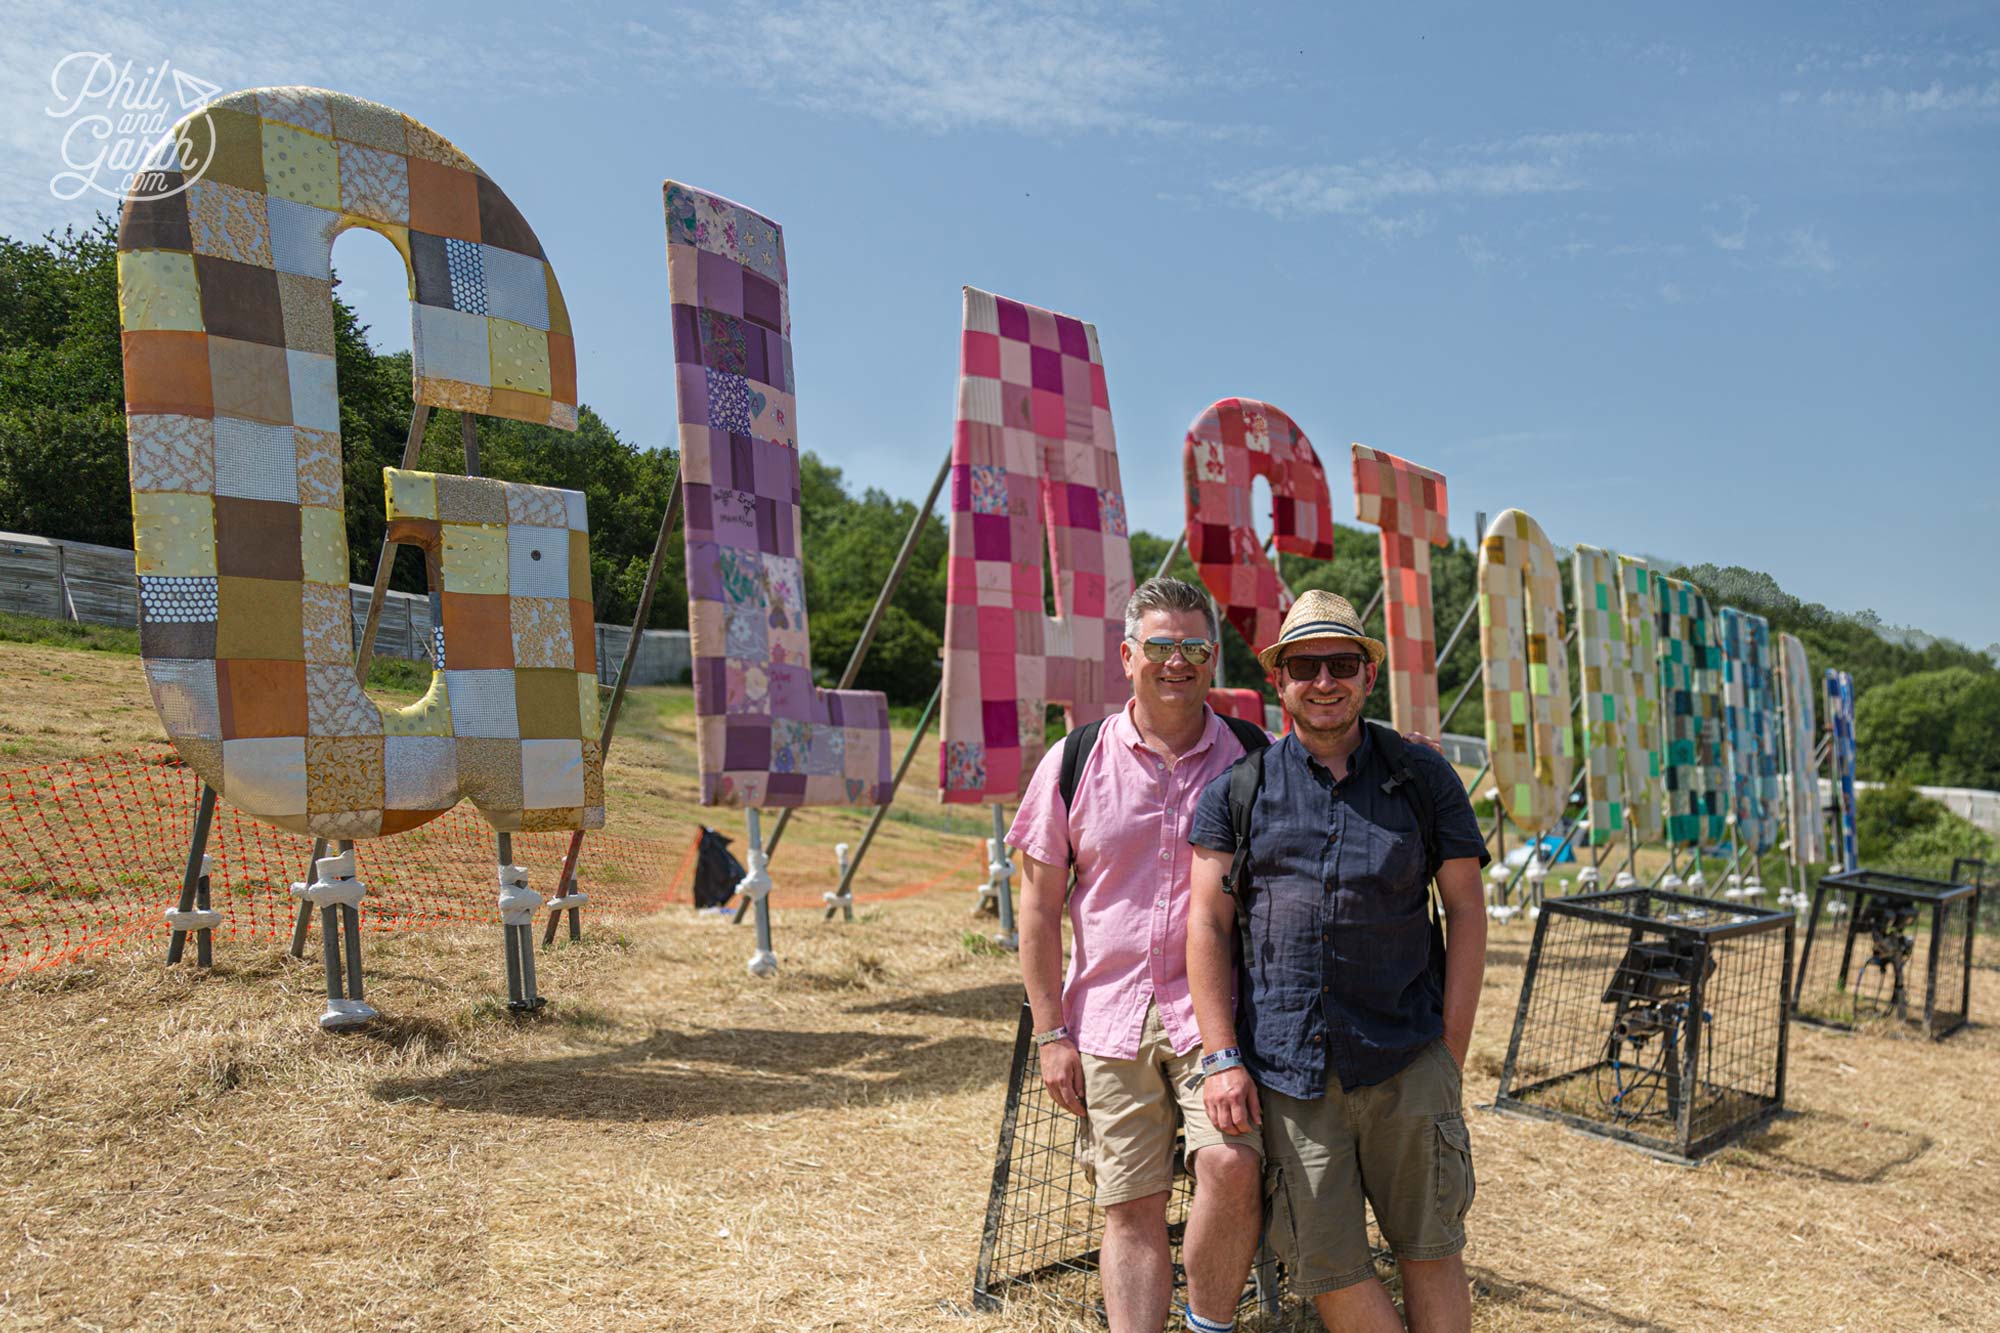 Phil and Garth at the Glastonbury sign